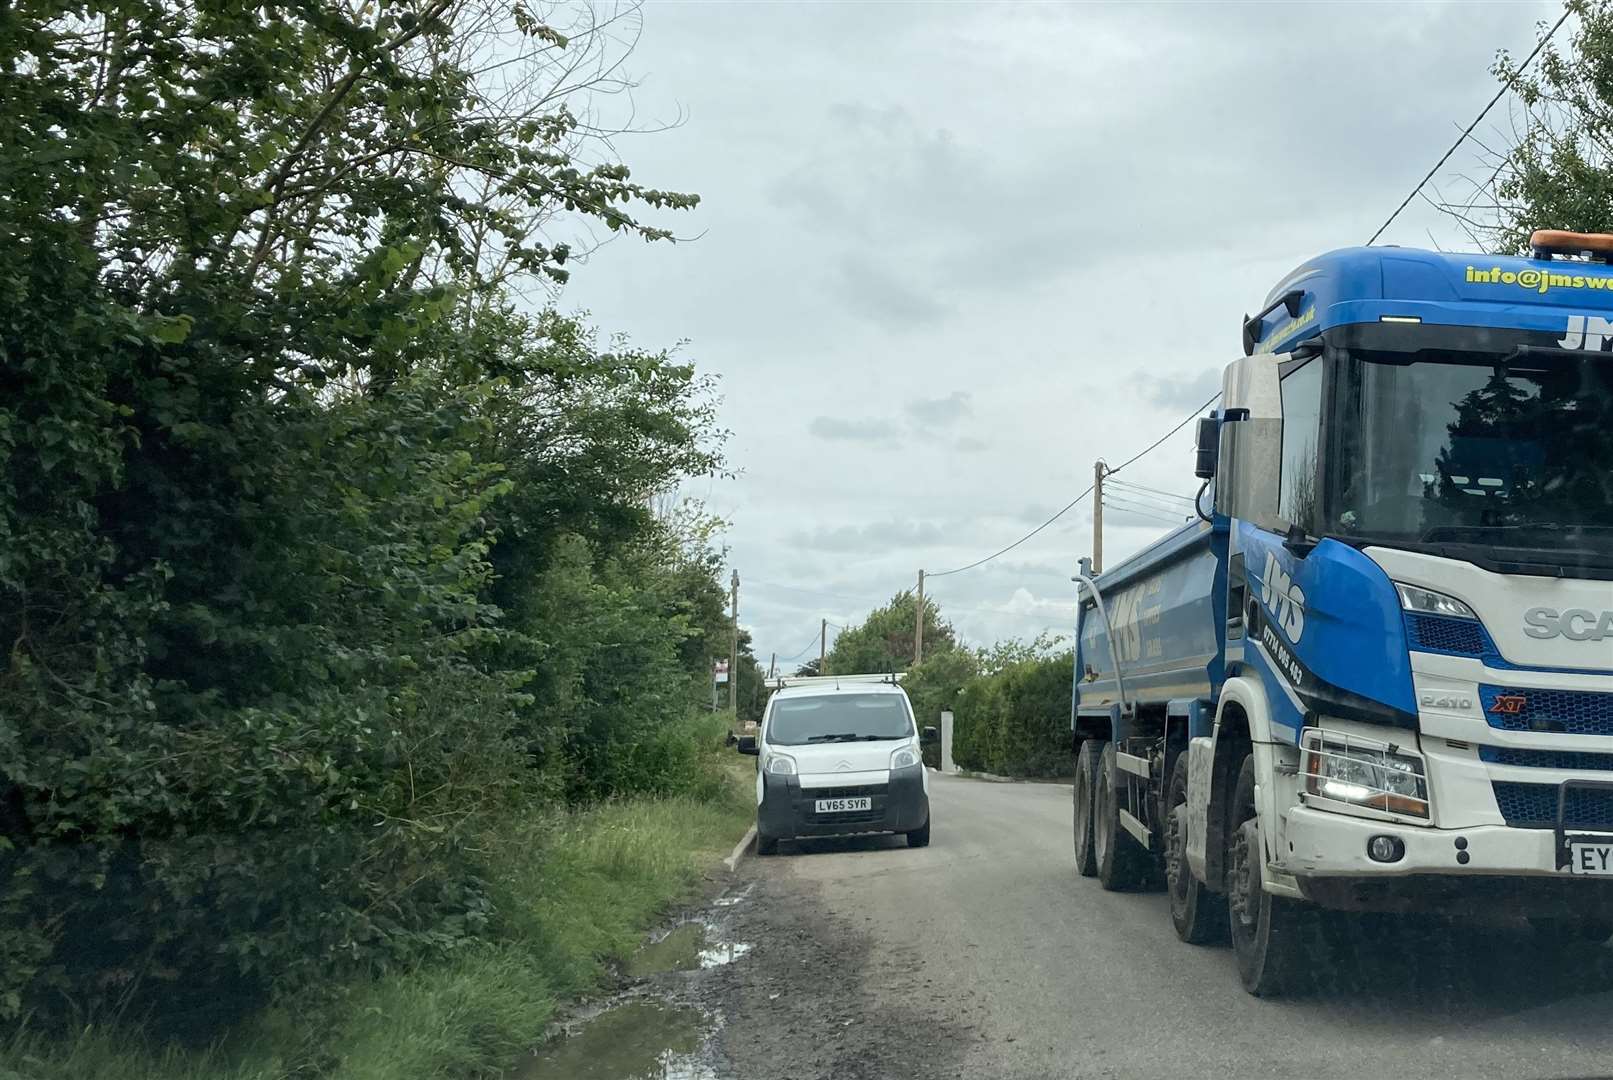 Residents are complaining about large tipper lorries using Warden Road at Eastchurch